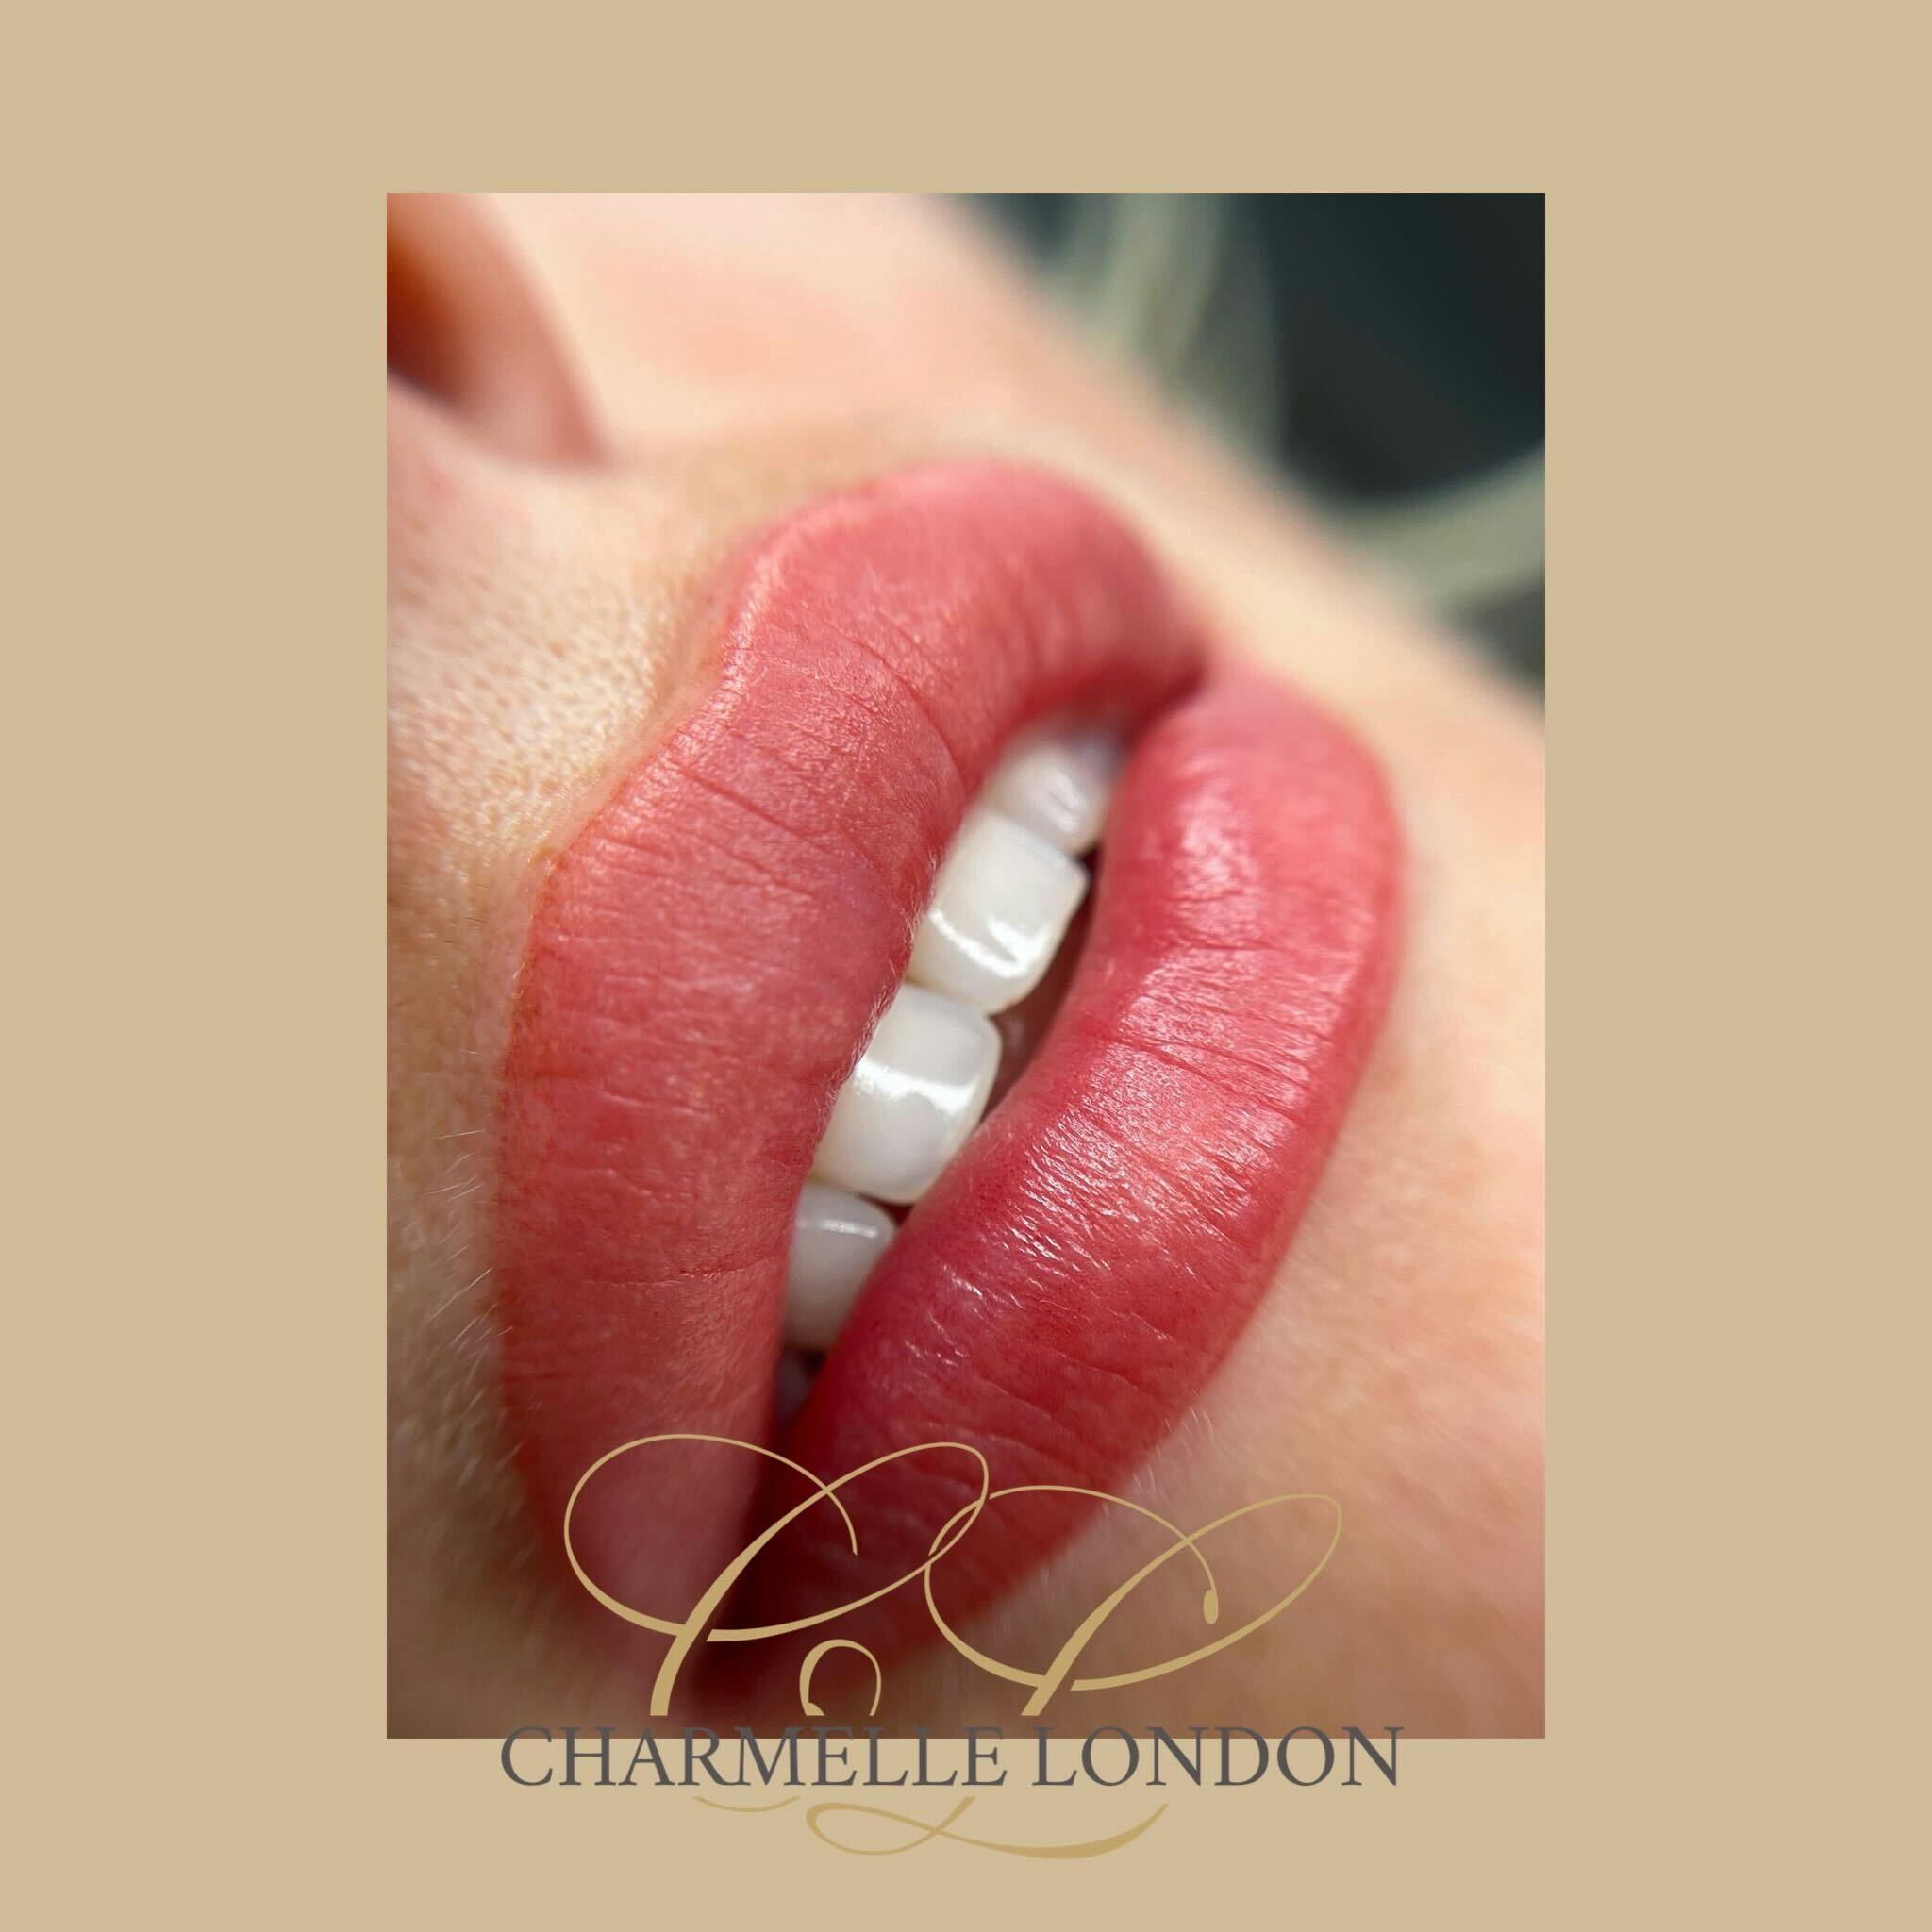 Our permanent lipstick treatments give you fuller, younger looking lips with a colour that is incredibly flattering to your skin and best of all, no need to constantly reapply lipstick or gloss.